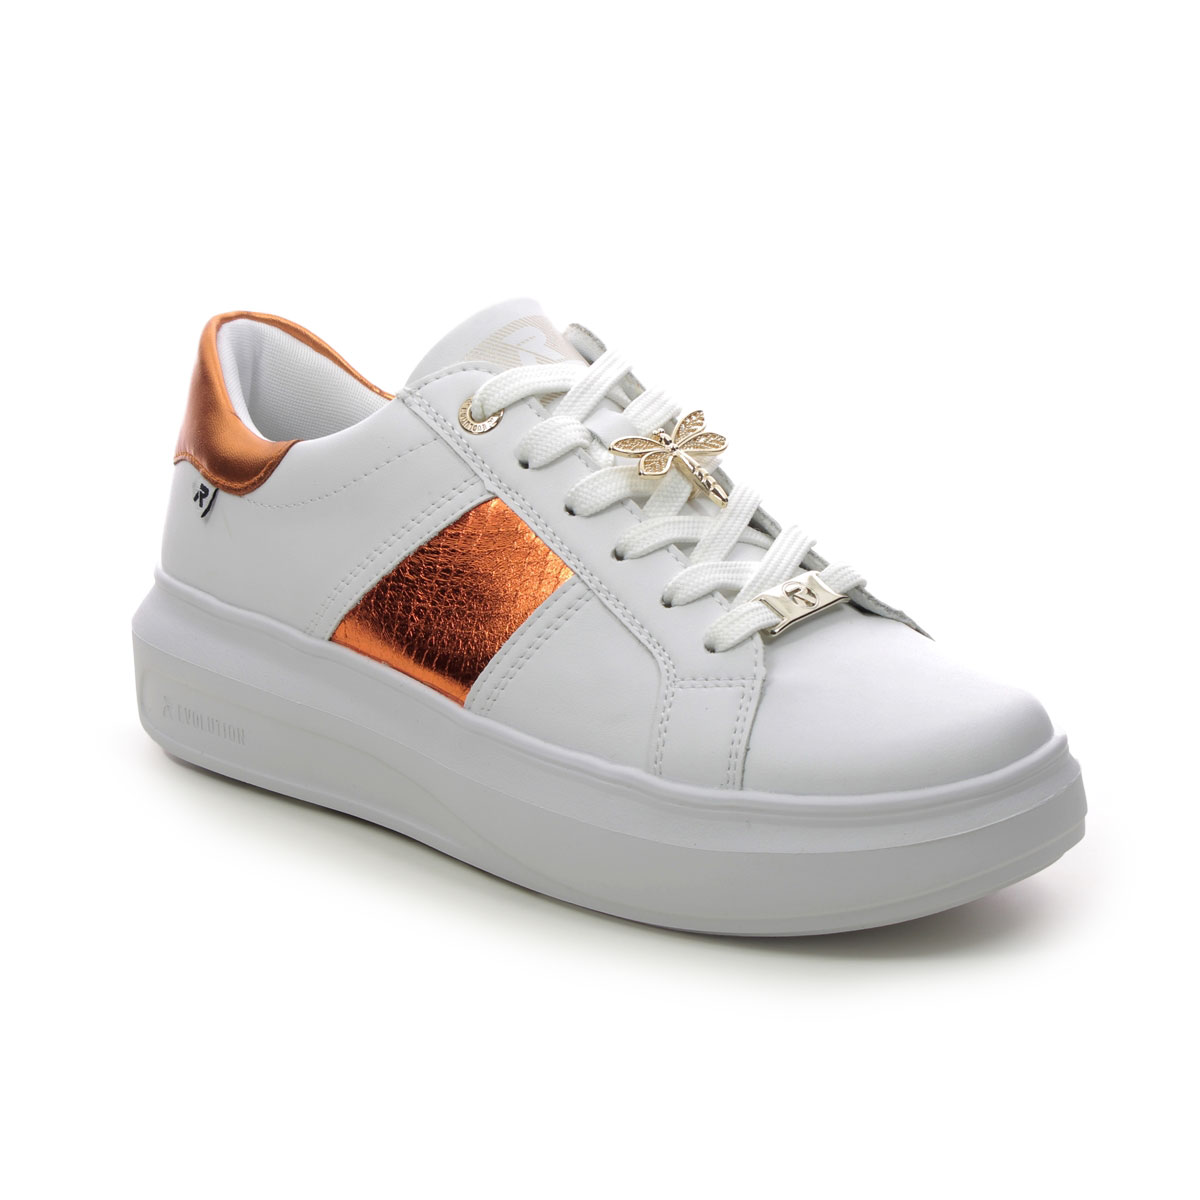 Rieker W1202-80 White Coral Womens trainers in a Plain Leather in Size 39